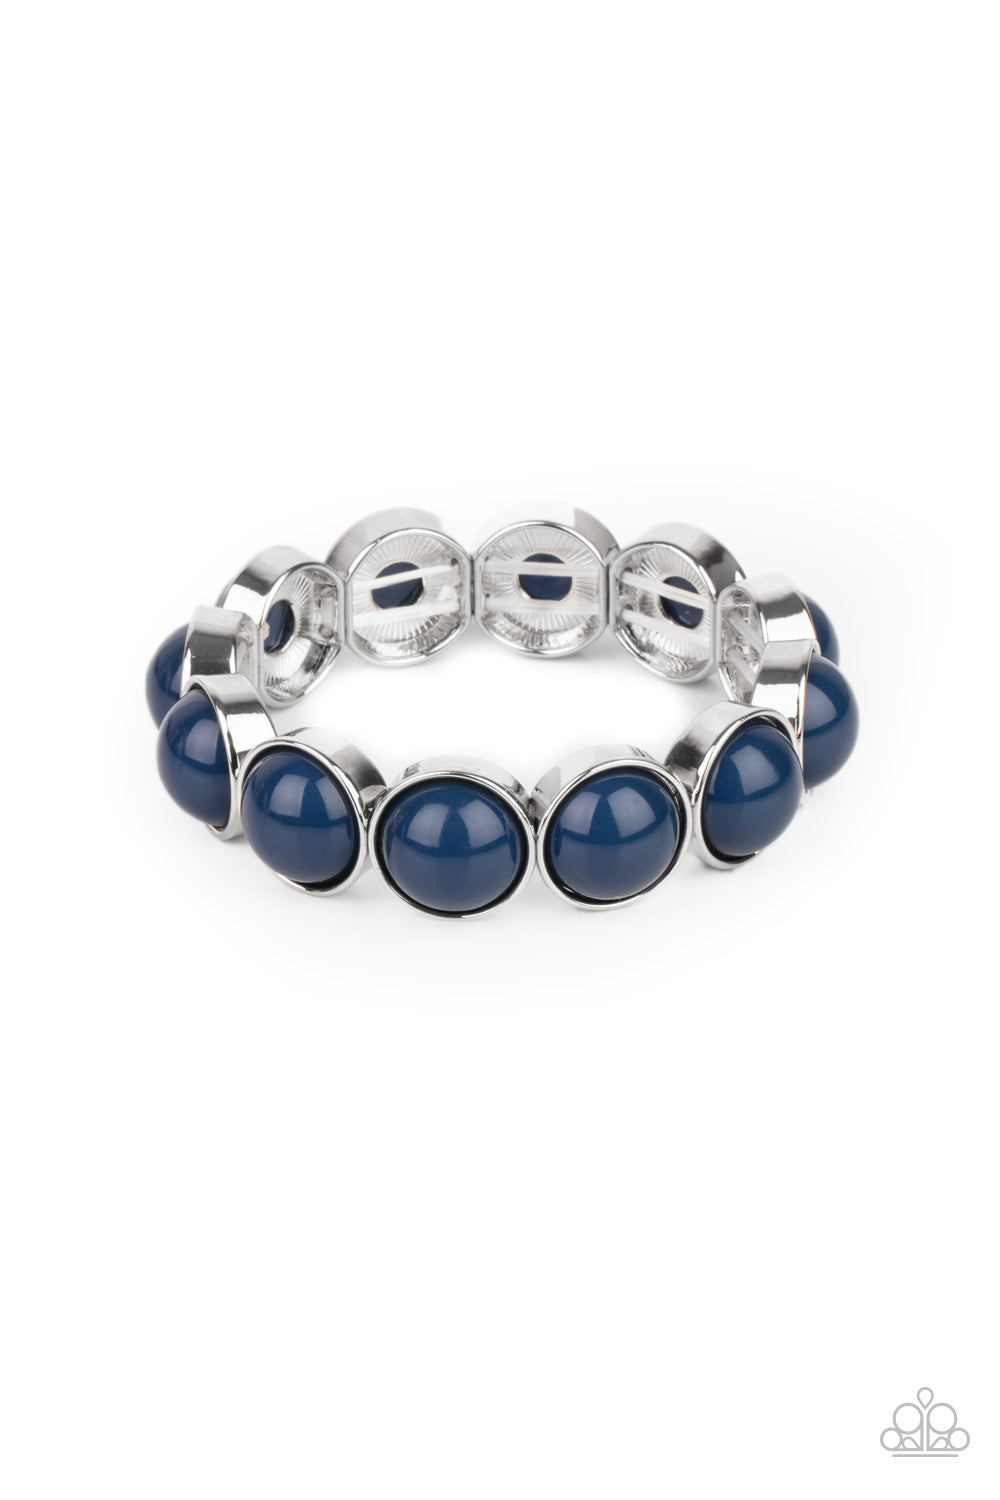 Paparazzi Accessories - Pop, Drop and Roll - Blue Beaded Bracelets